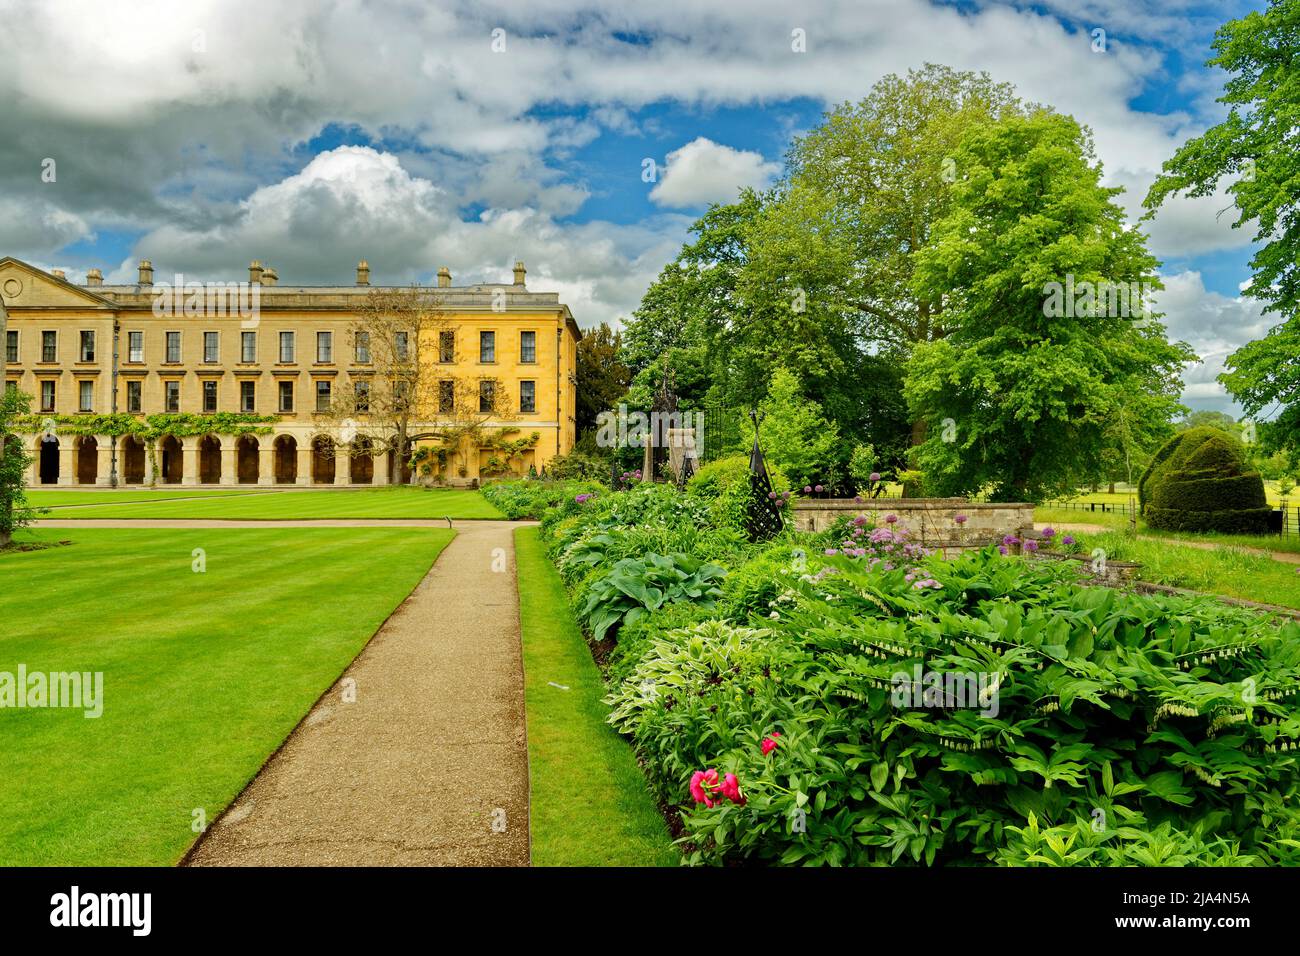 OXFORD CITY ENGLAND MAGDALEN COLLEGE THE NEW BUILDING SUPERB FLOWER BEDS TREES AND LAWNS IN SPRING Stock Photo